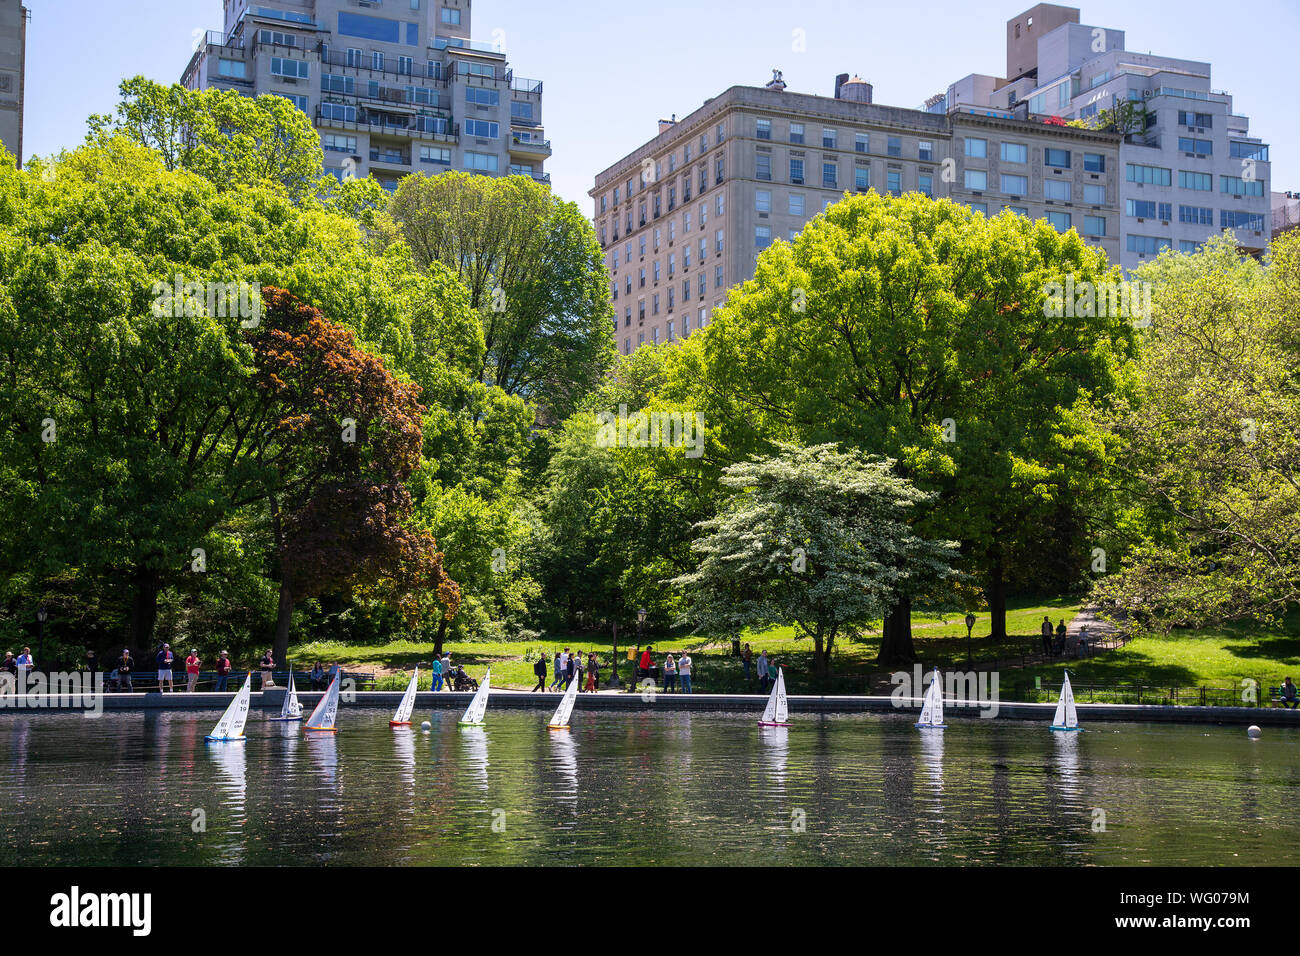 Model sailboats on the Conservatory Pond in Central Park, New York City. Stock Photo